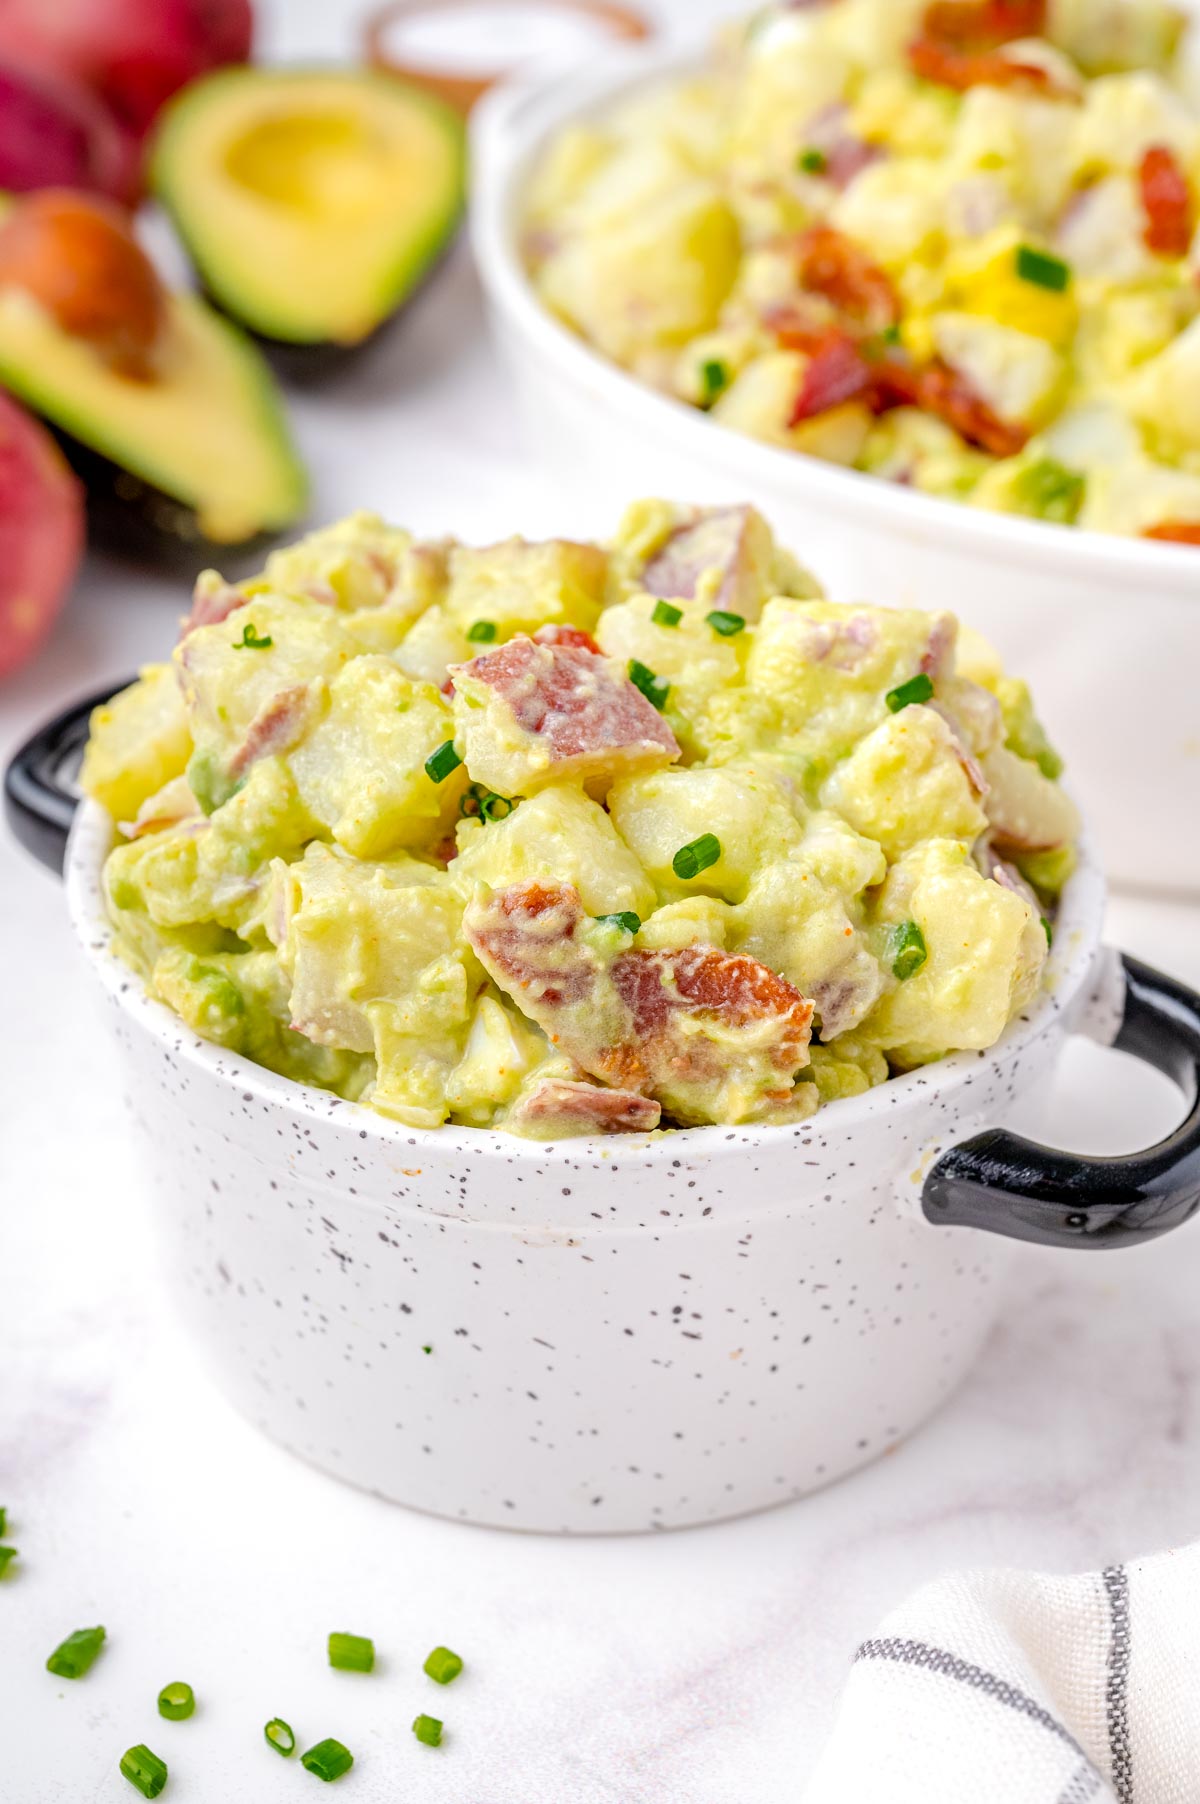 The finished Avocado Potato Salad WIth Bacon in a serving bowl.